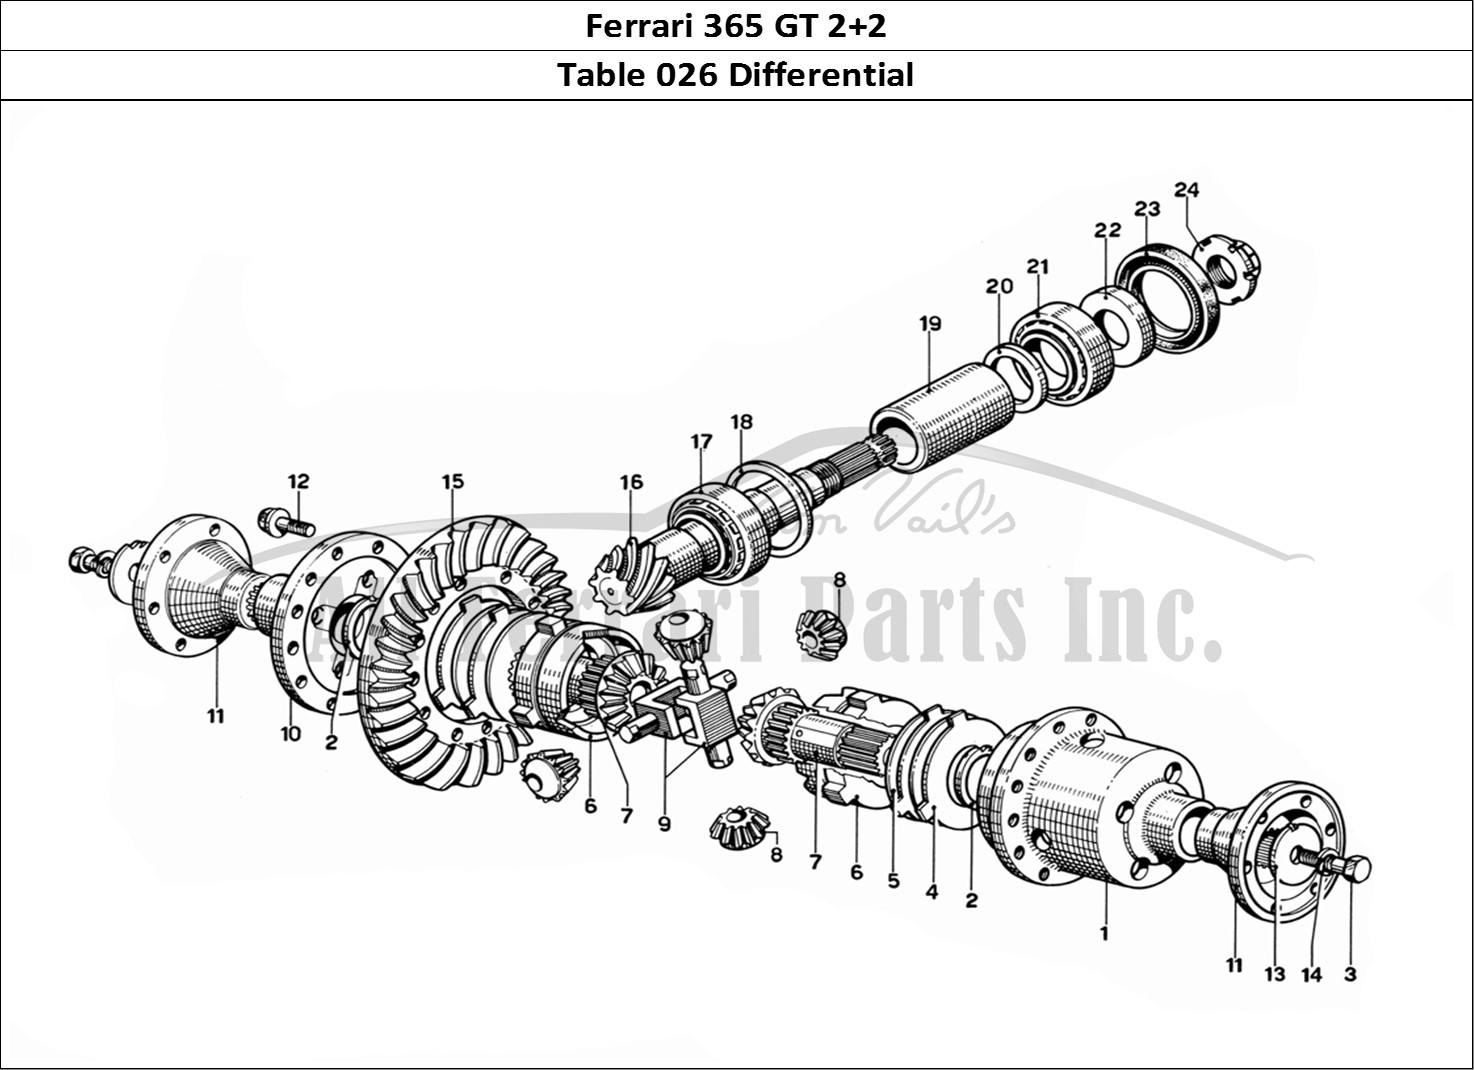 Ferrari Parts Ferrari 365 GT 2+2 (Mechanical) Page 026 Differential - Pinion and